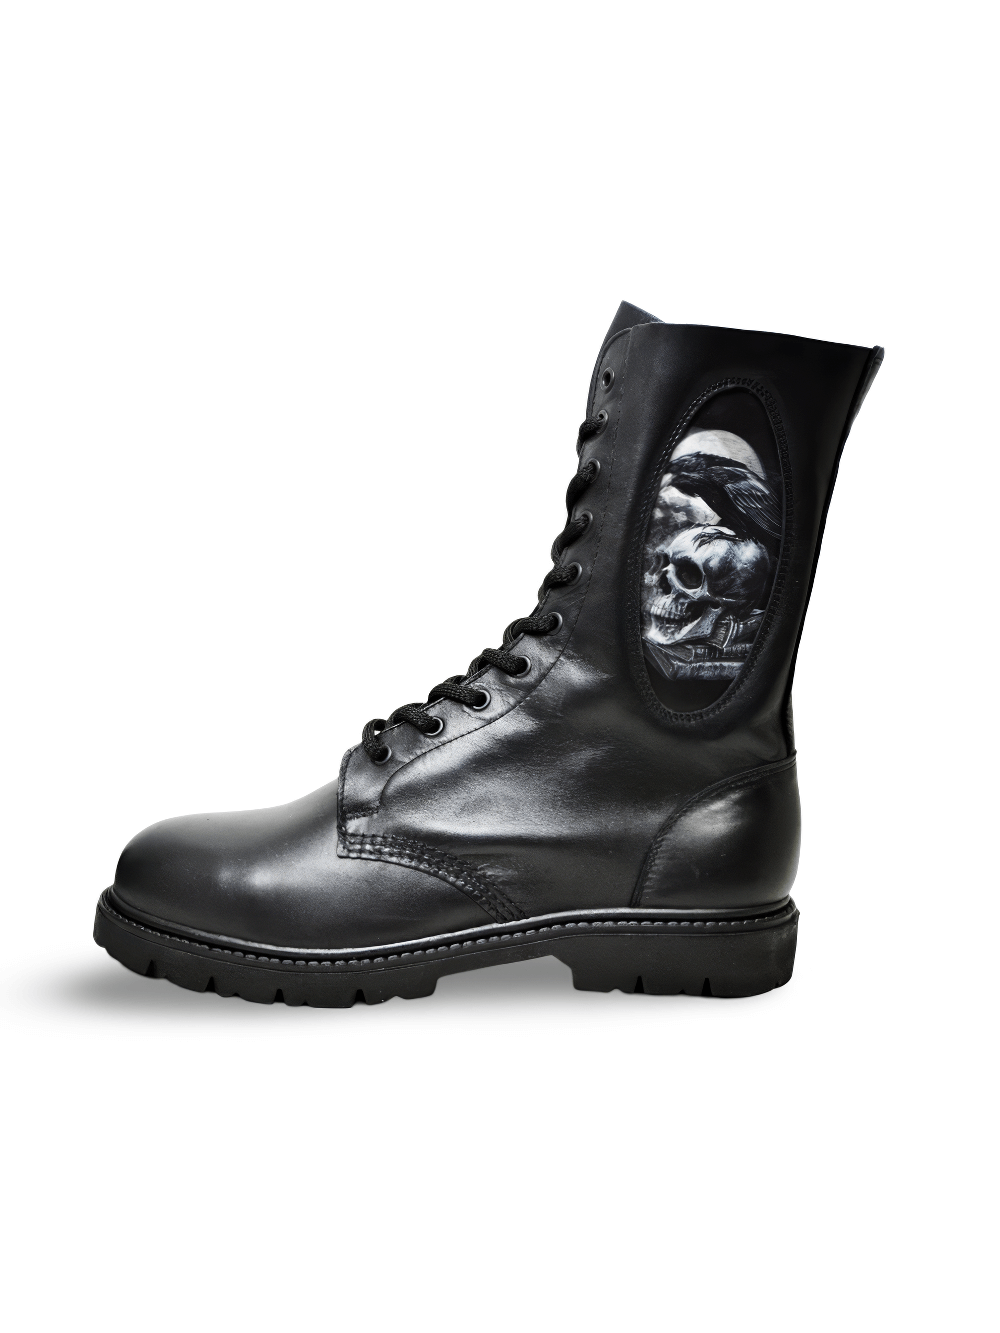 Handmade Black Lace-Up Mid-Calf Boots with Skull Print